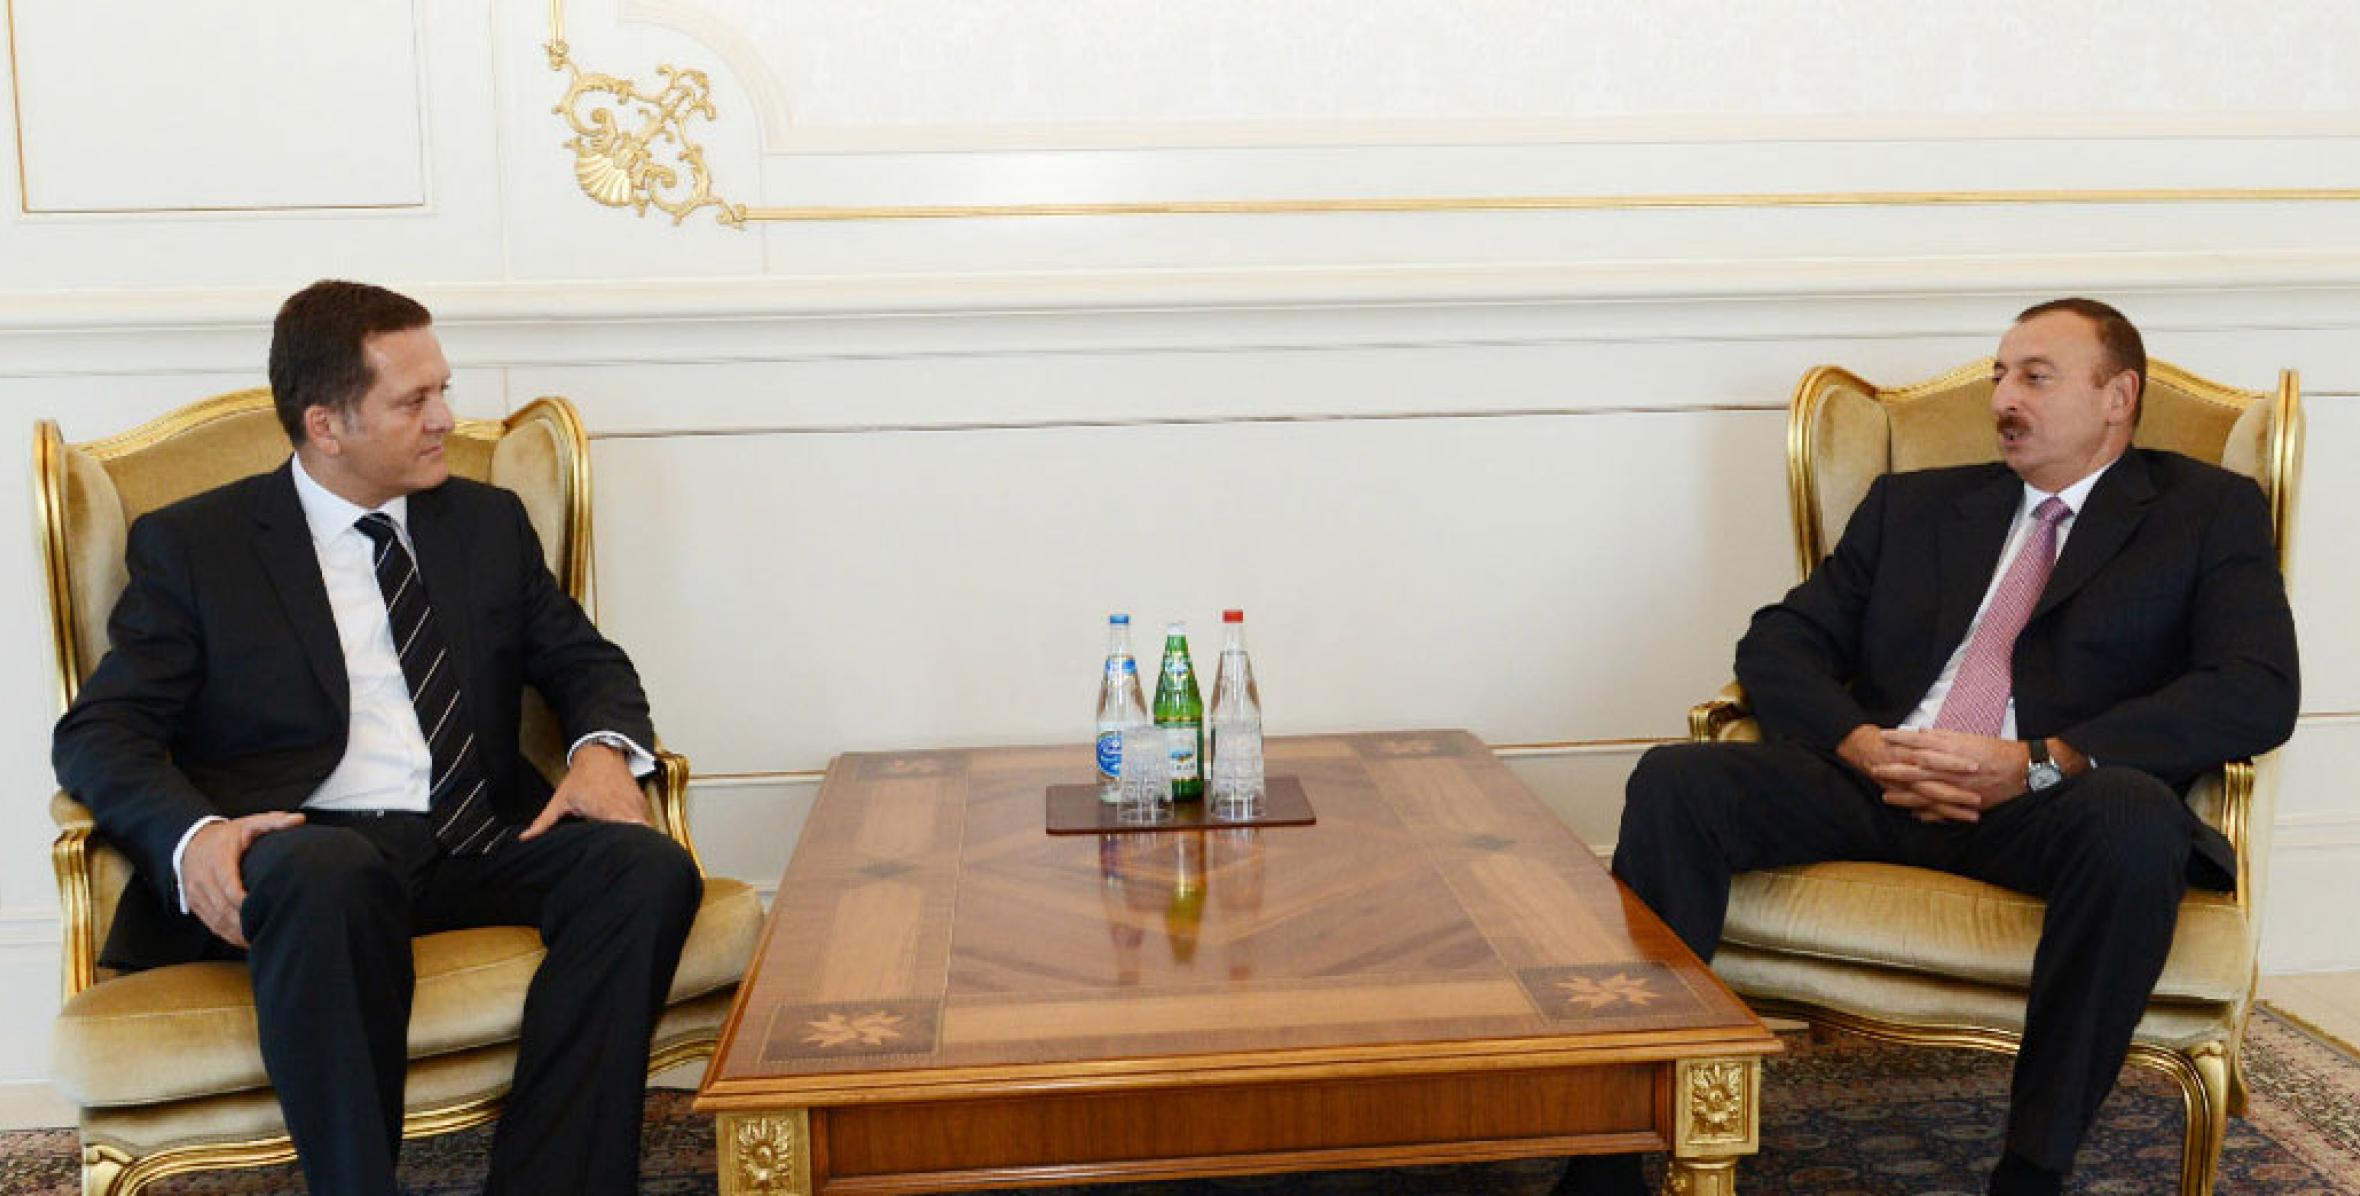 Ilham Aliyev accepted the credentials of the newly-appointed Ambassador Extraordinary and Plenipotentiary of Turkey to Azerbaijan